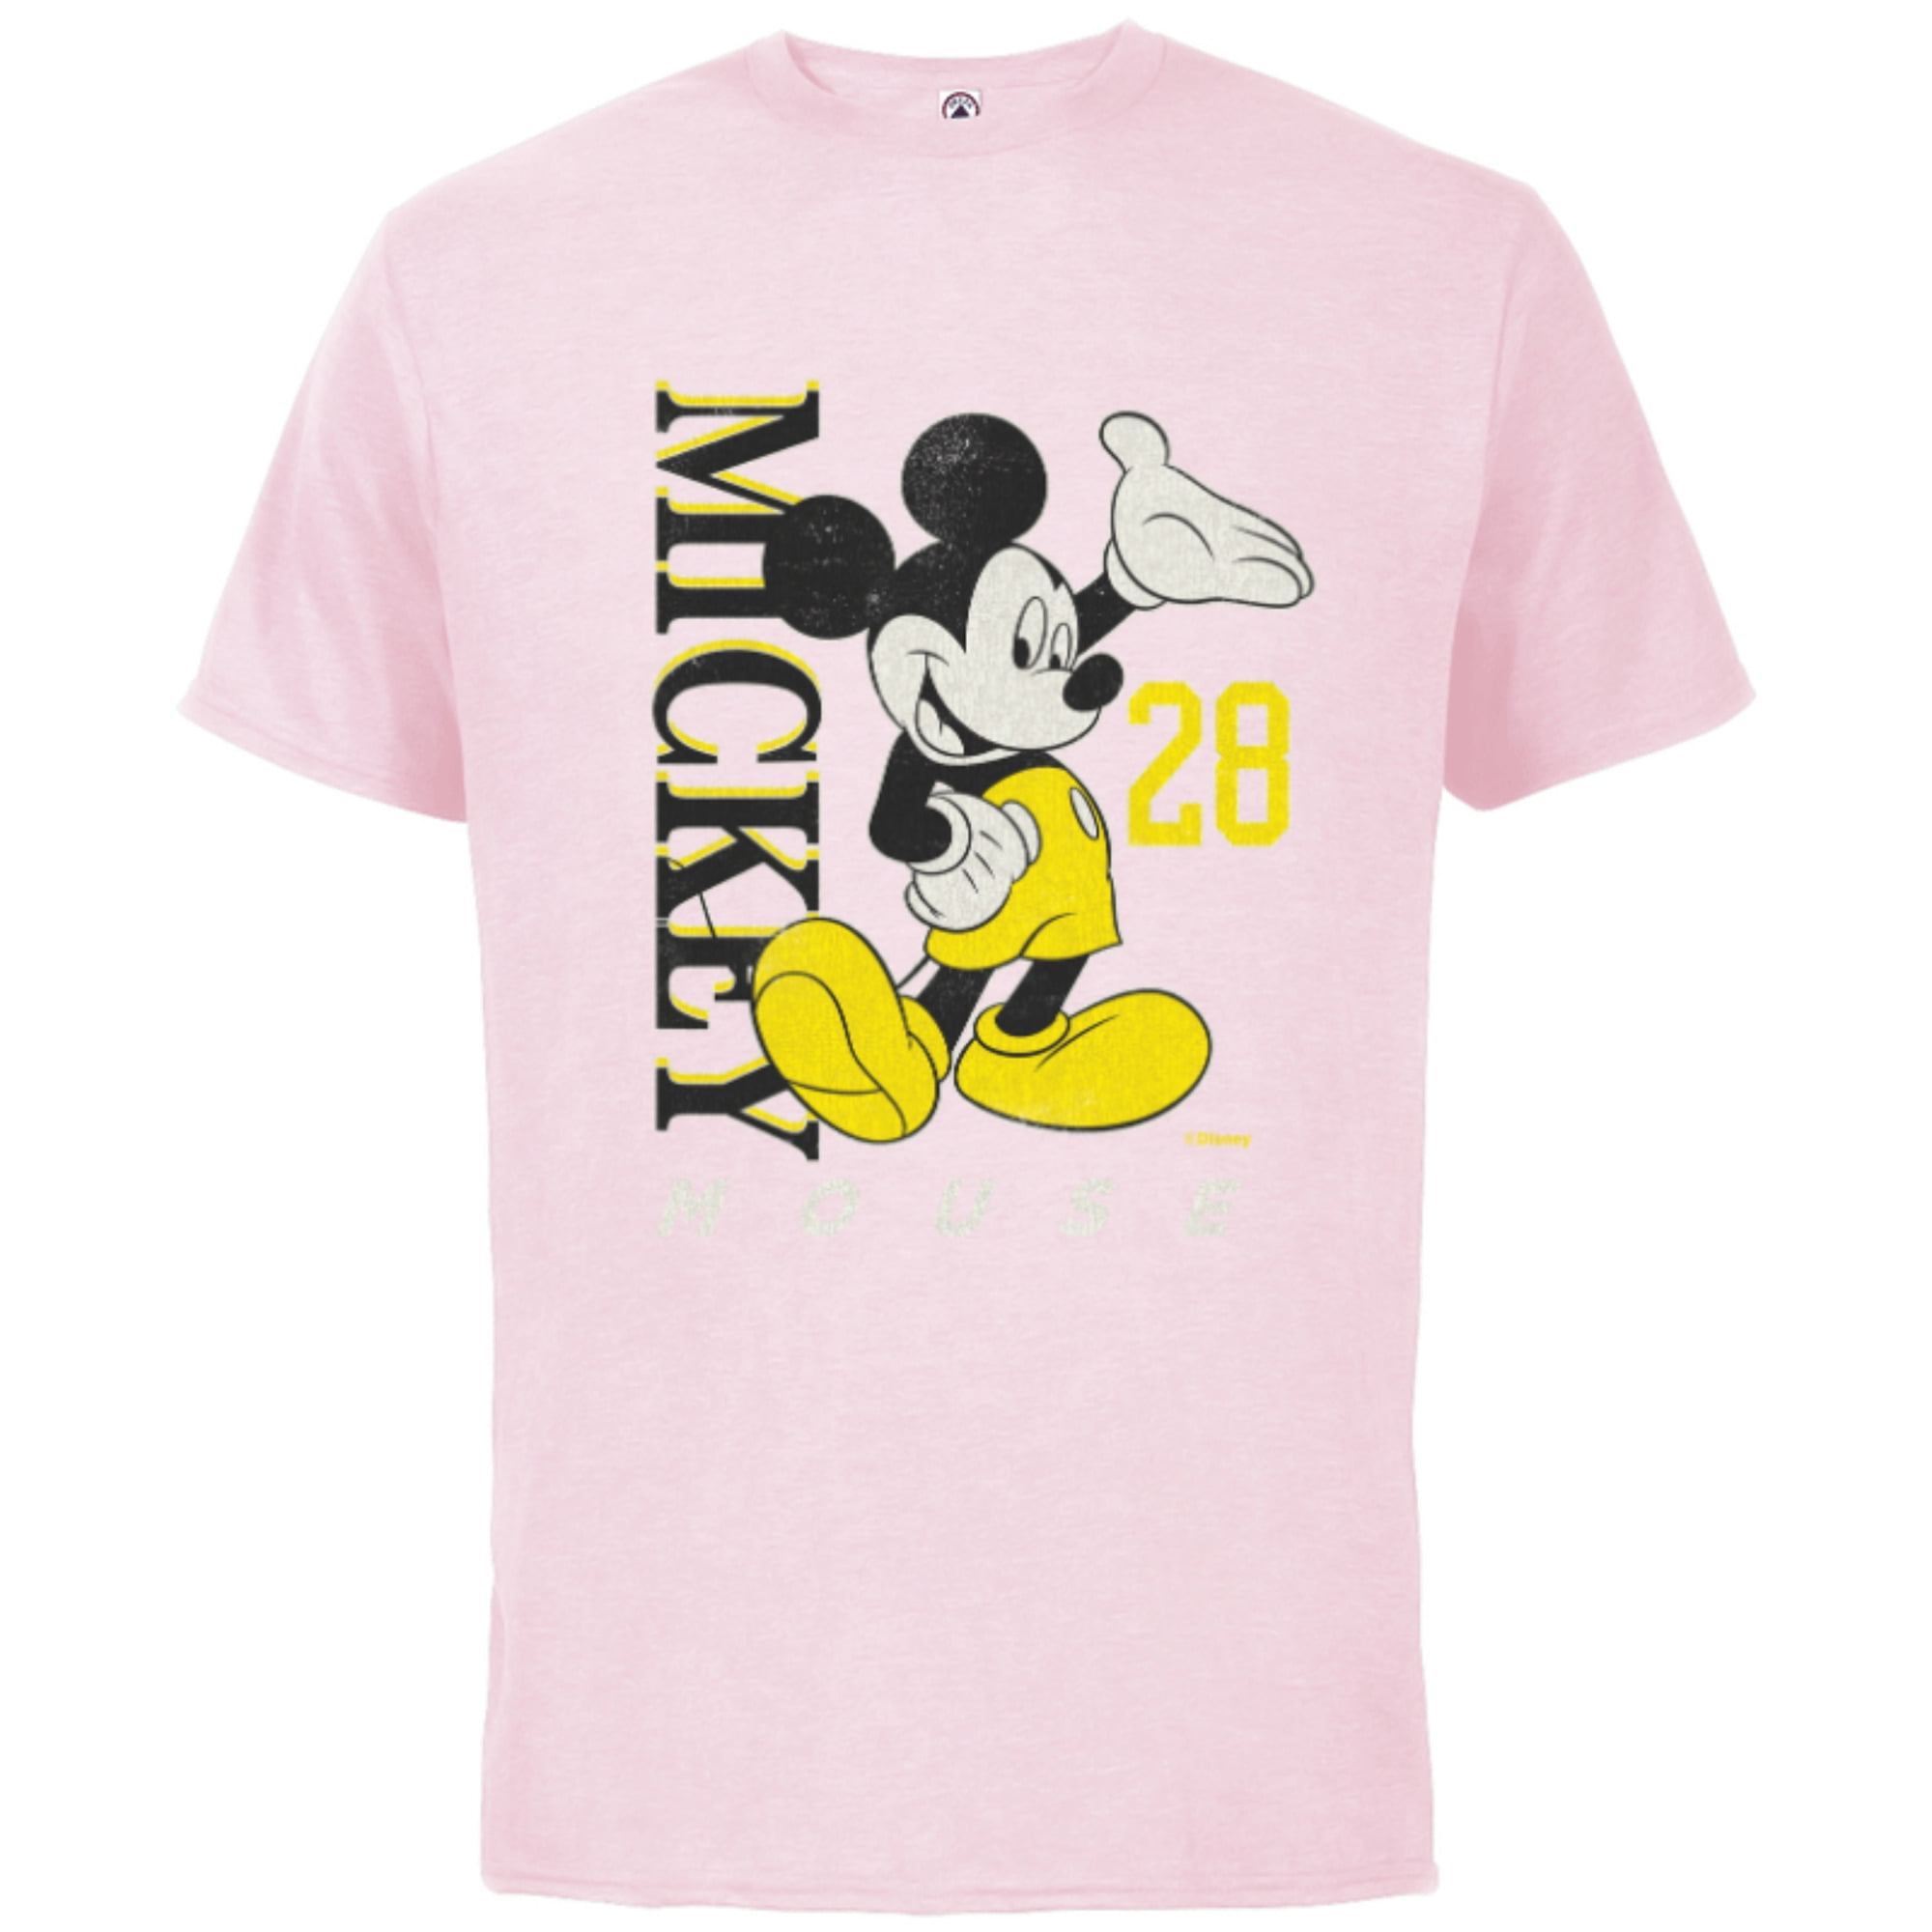 Sleeve Classics Adults Customized-Black Short Black Cotton 28 & Yellow - Mouse T-Shirt Vintage Mickey for Disney -